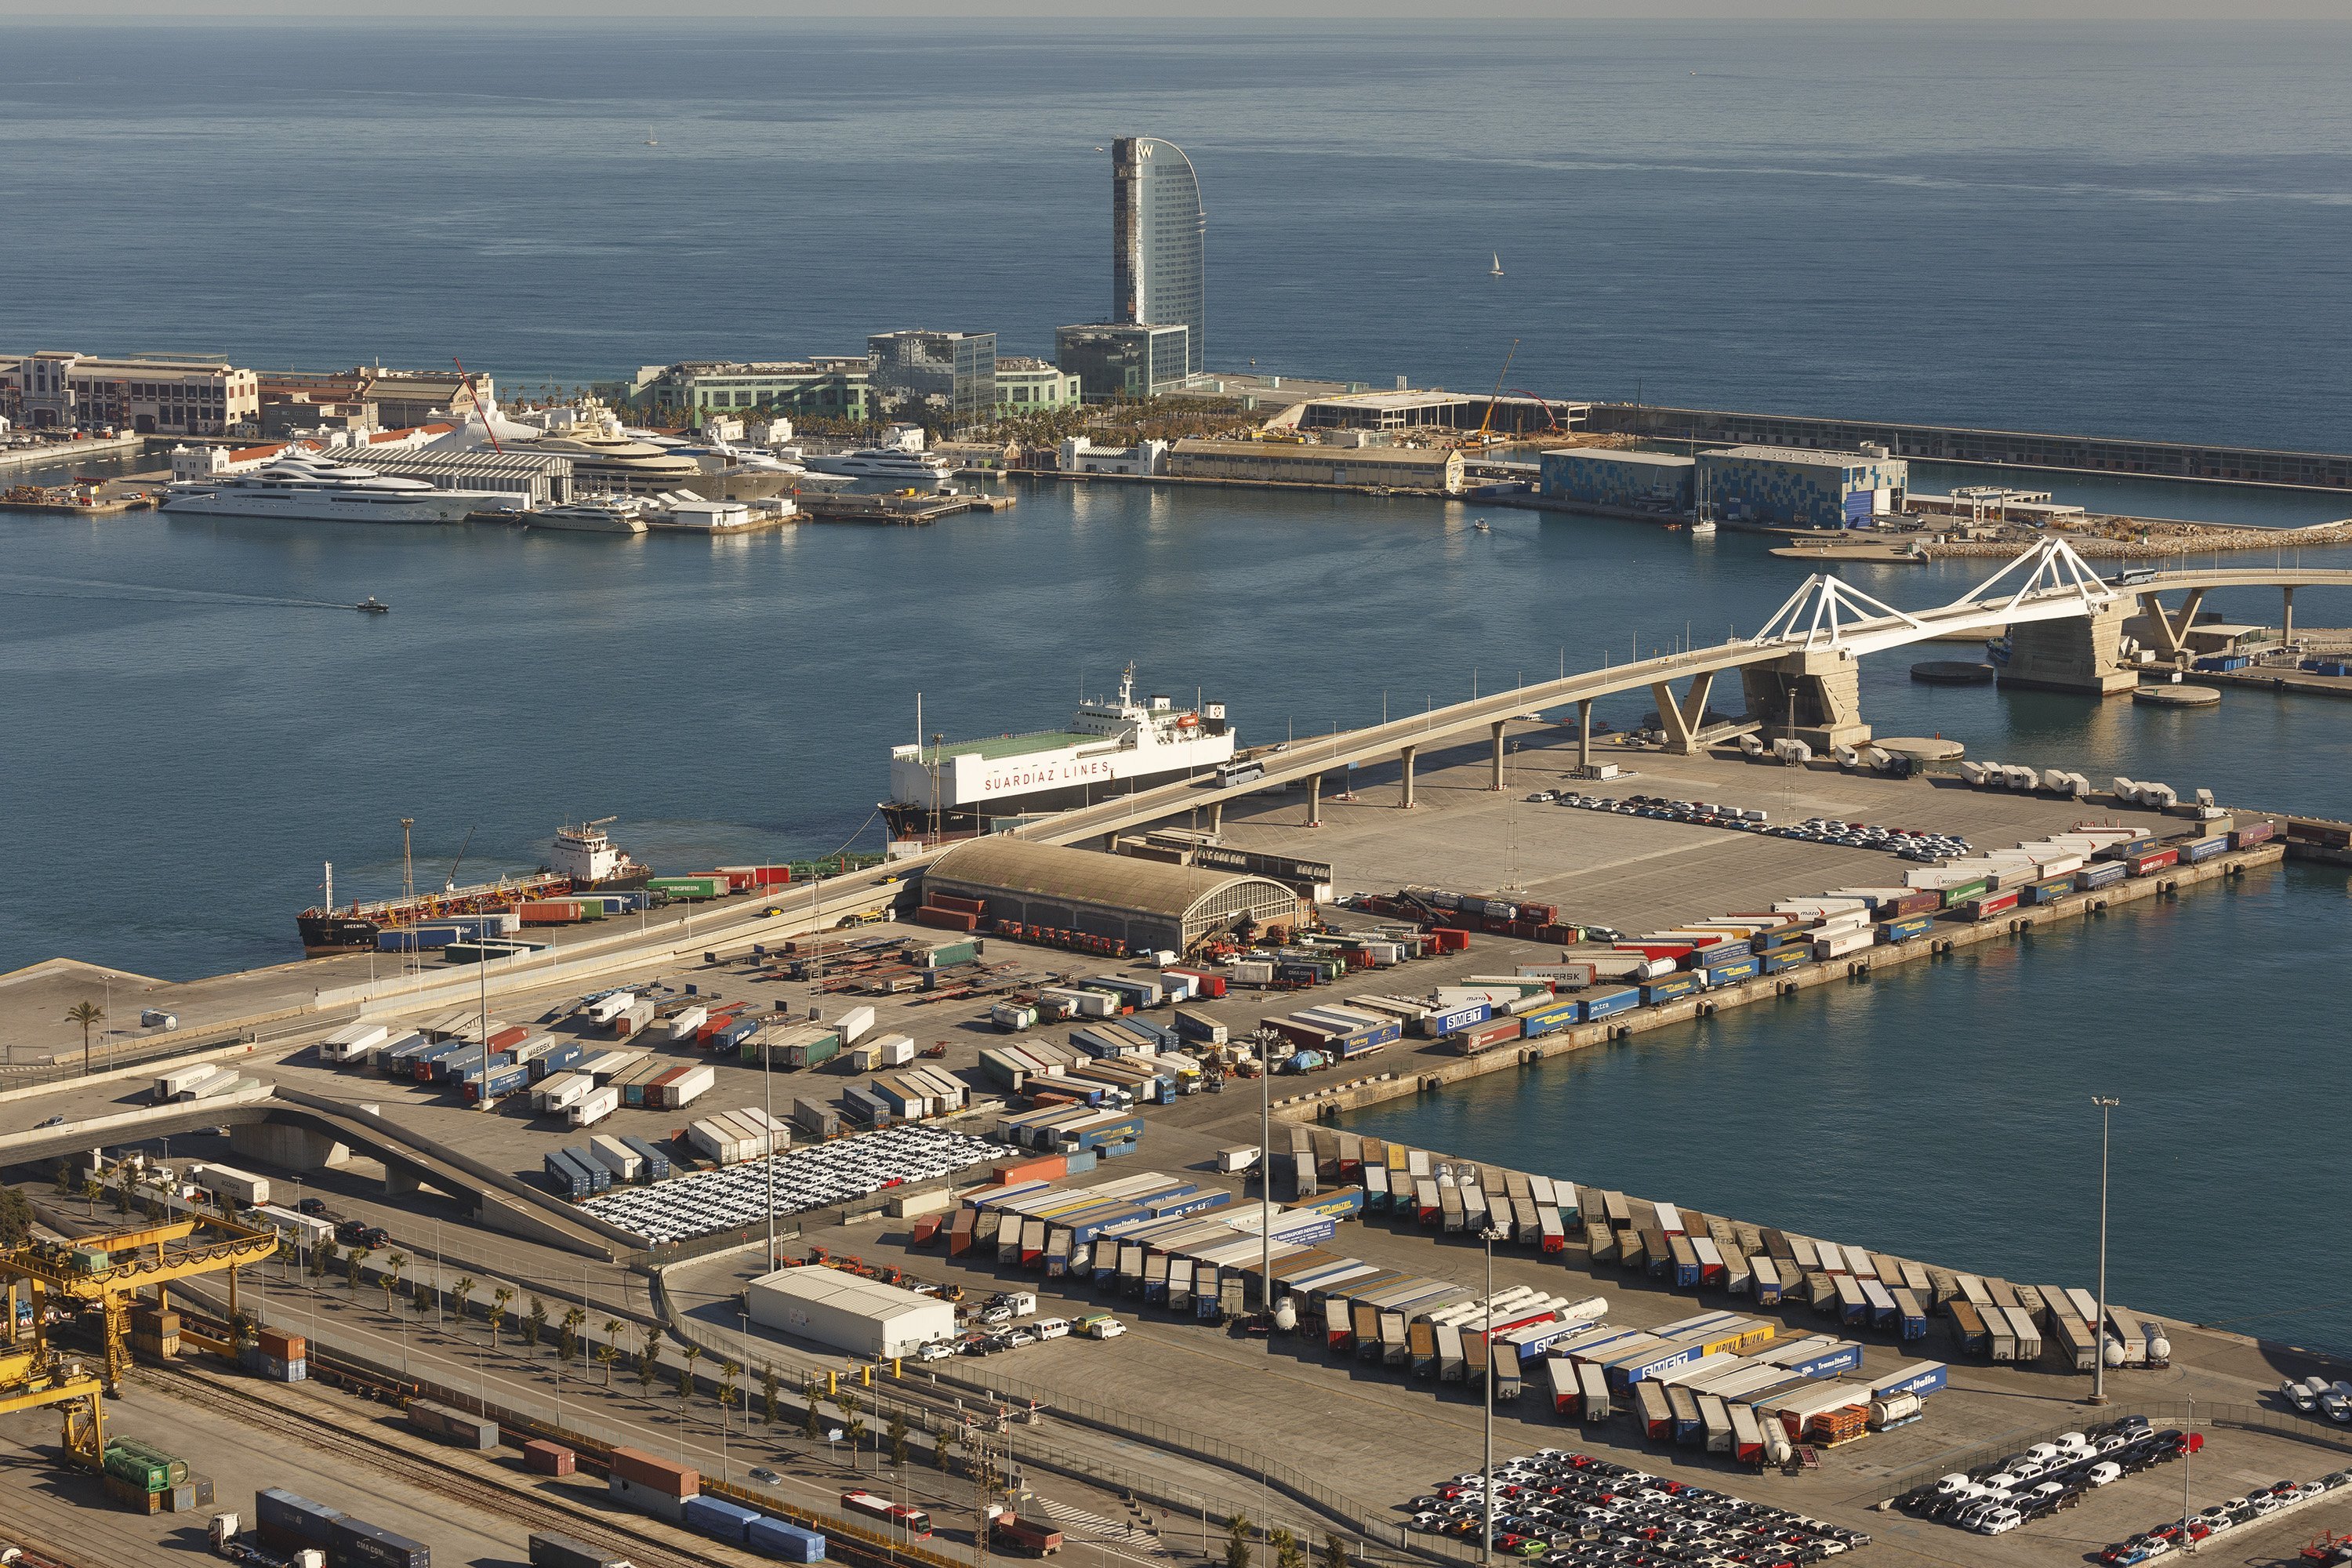 Port of Barcelona records best trimester in its history